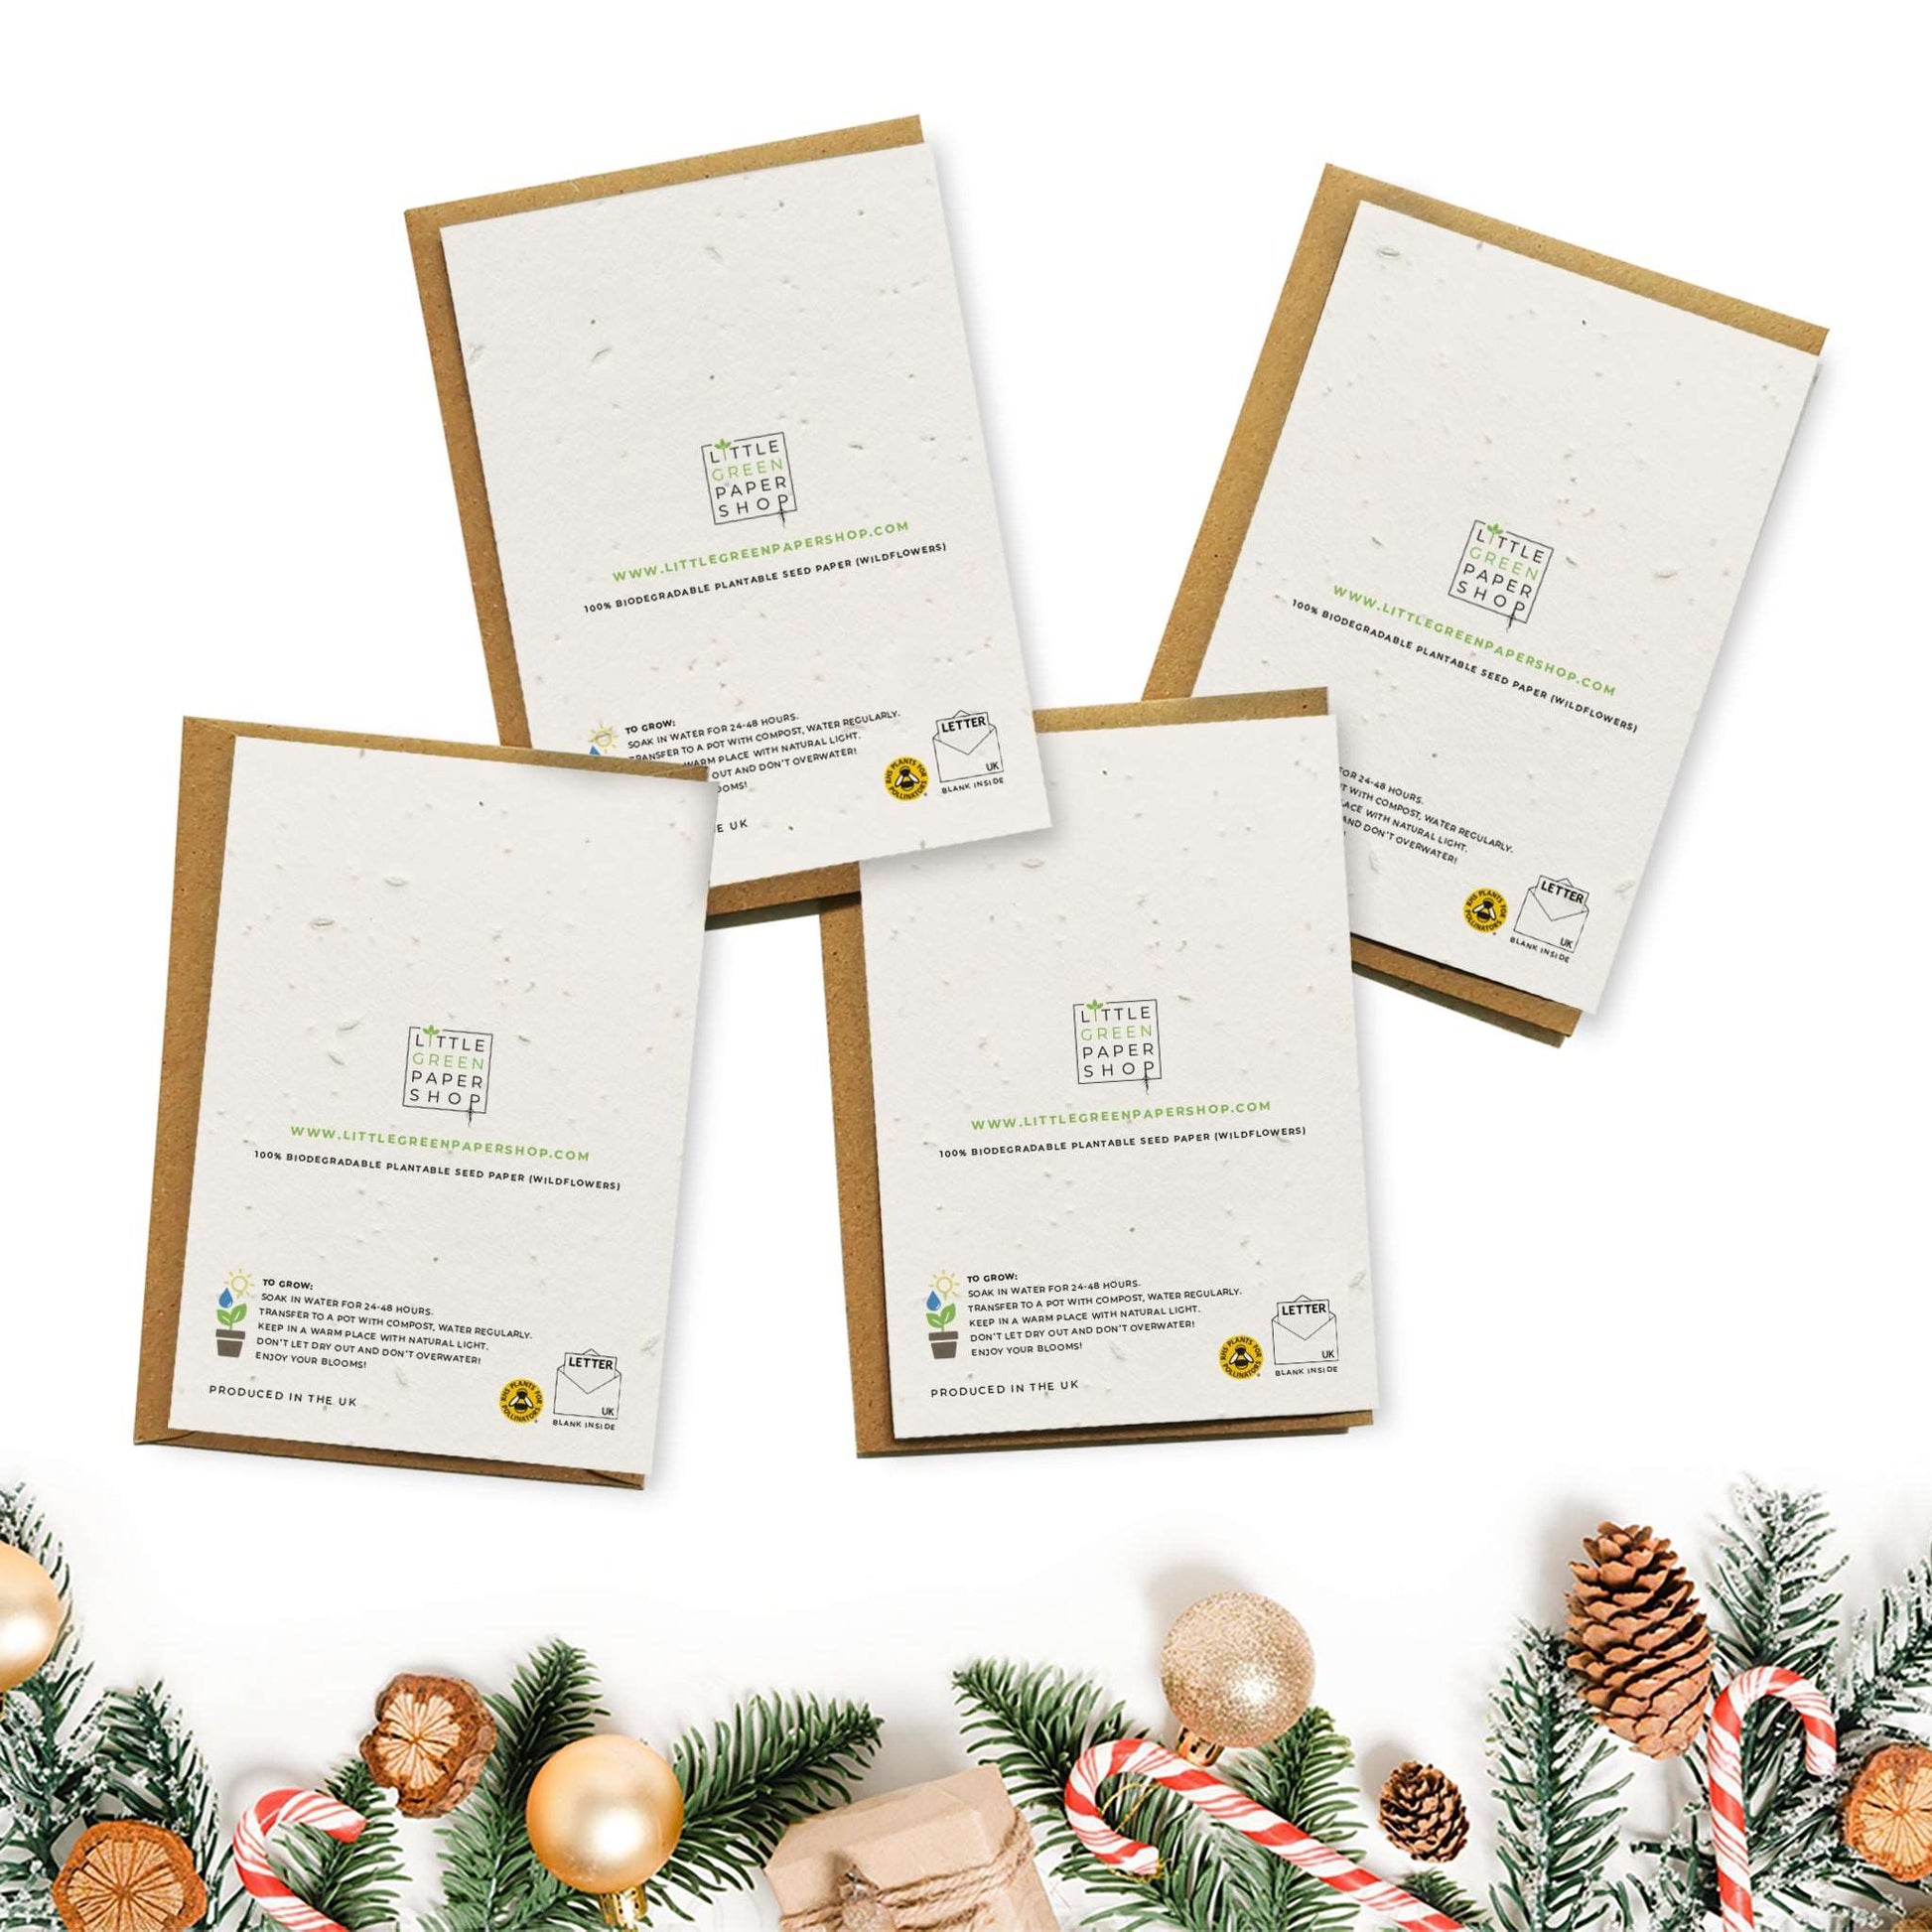 Plantable Seed Paper Christmas Cards 4-Pack - Forest Friends Greeting Card Little Green Paper Shop